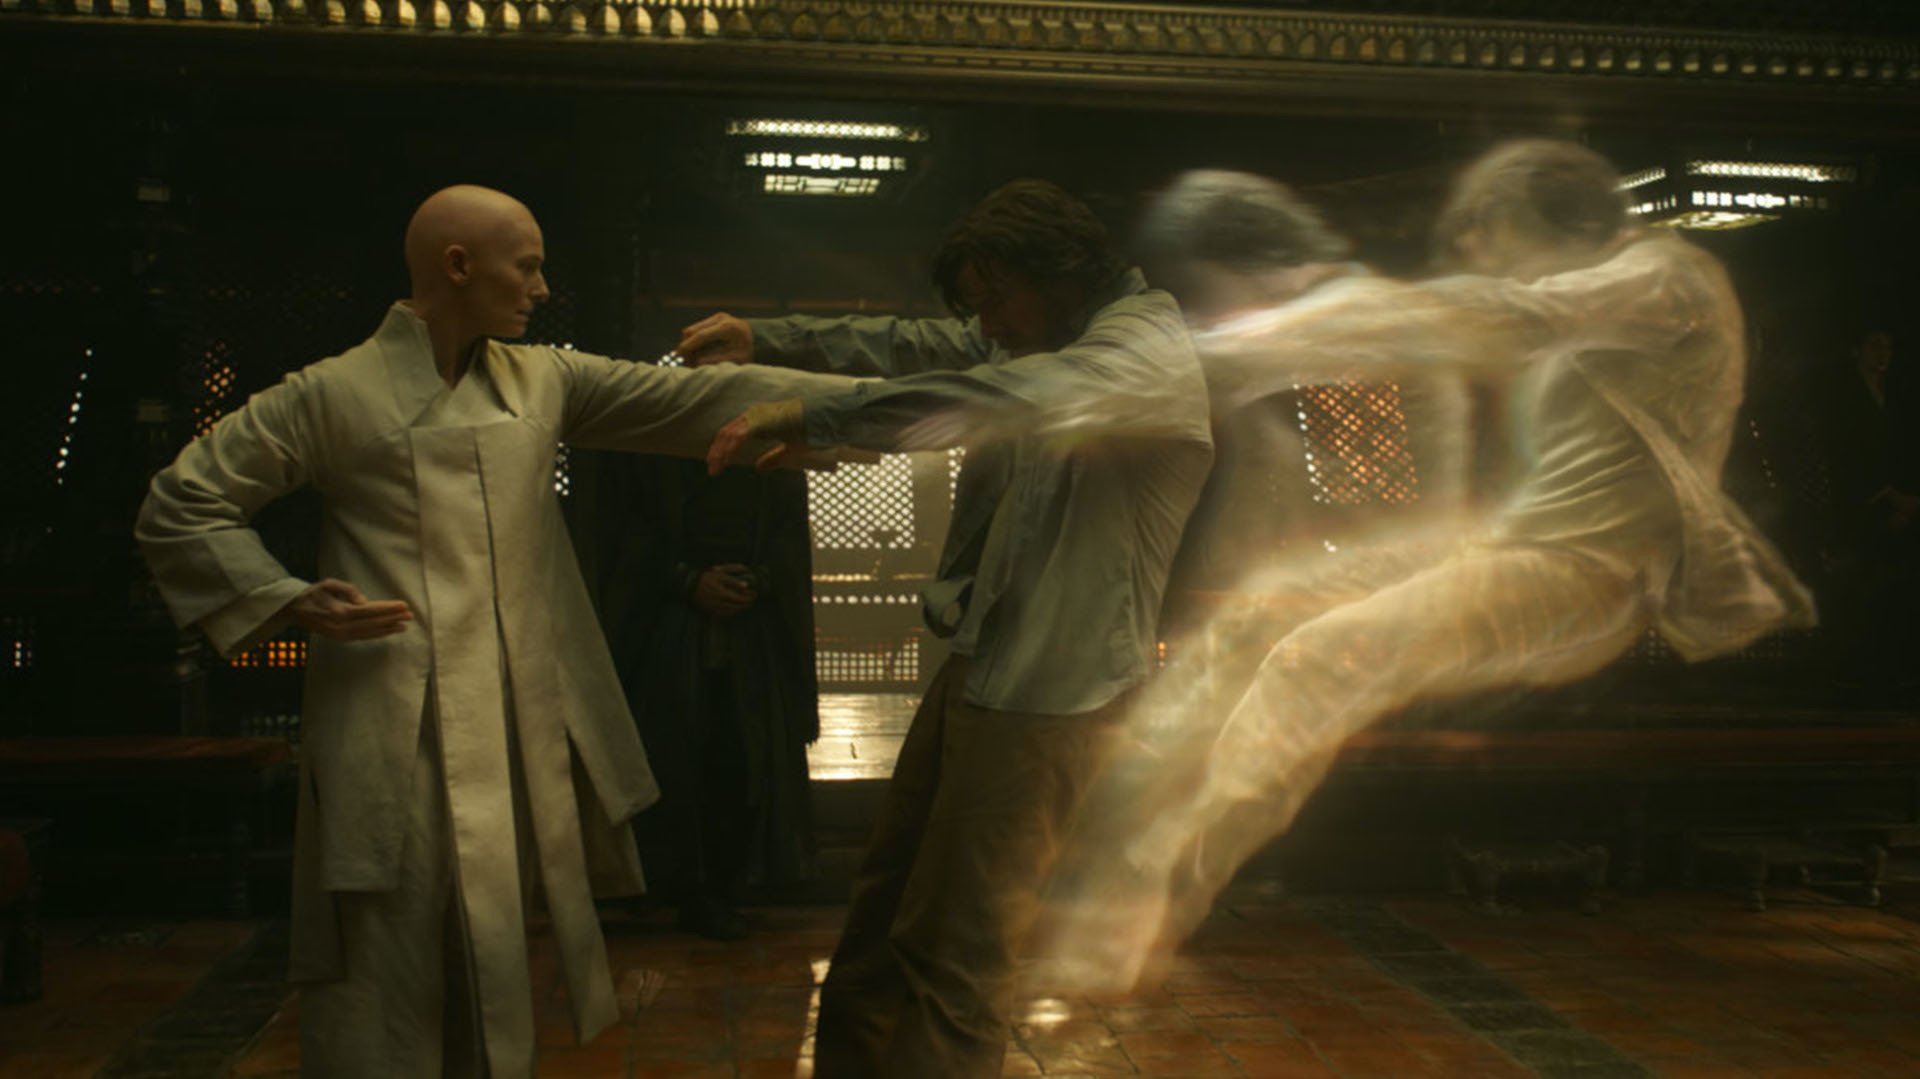 A bald monk (actor Tilda Swinton) punches a disheveled man (actor Benedict Cumberbatch), causing a ghostlike imprint to be ejected from his physical body. Still from "Doctor Strange."